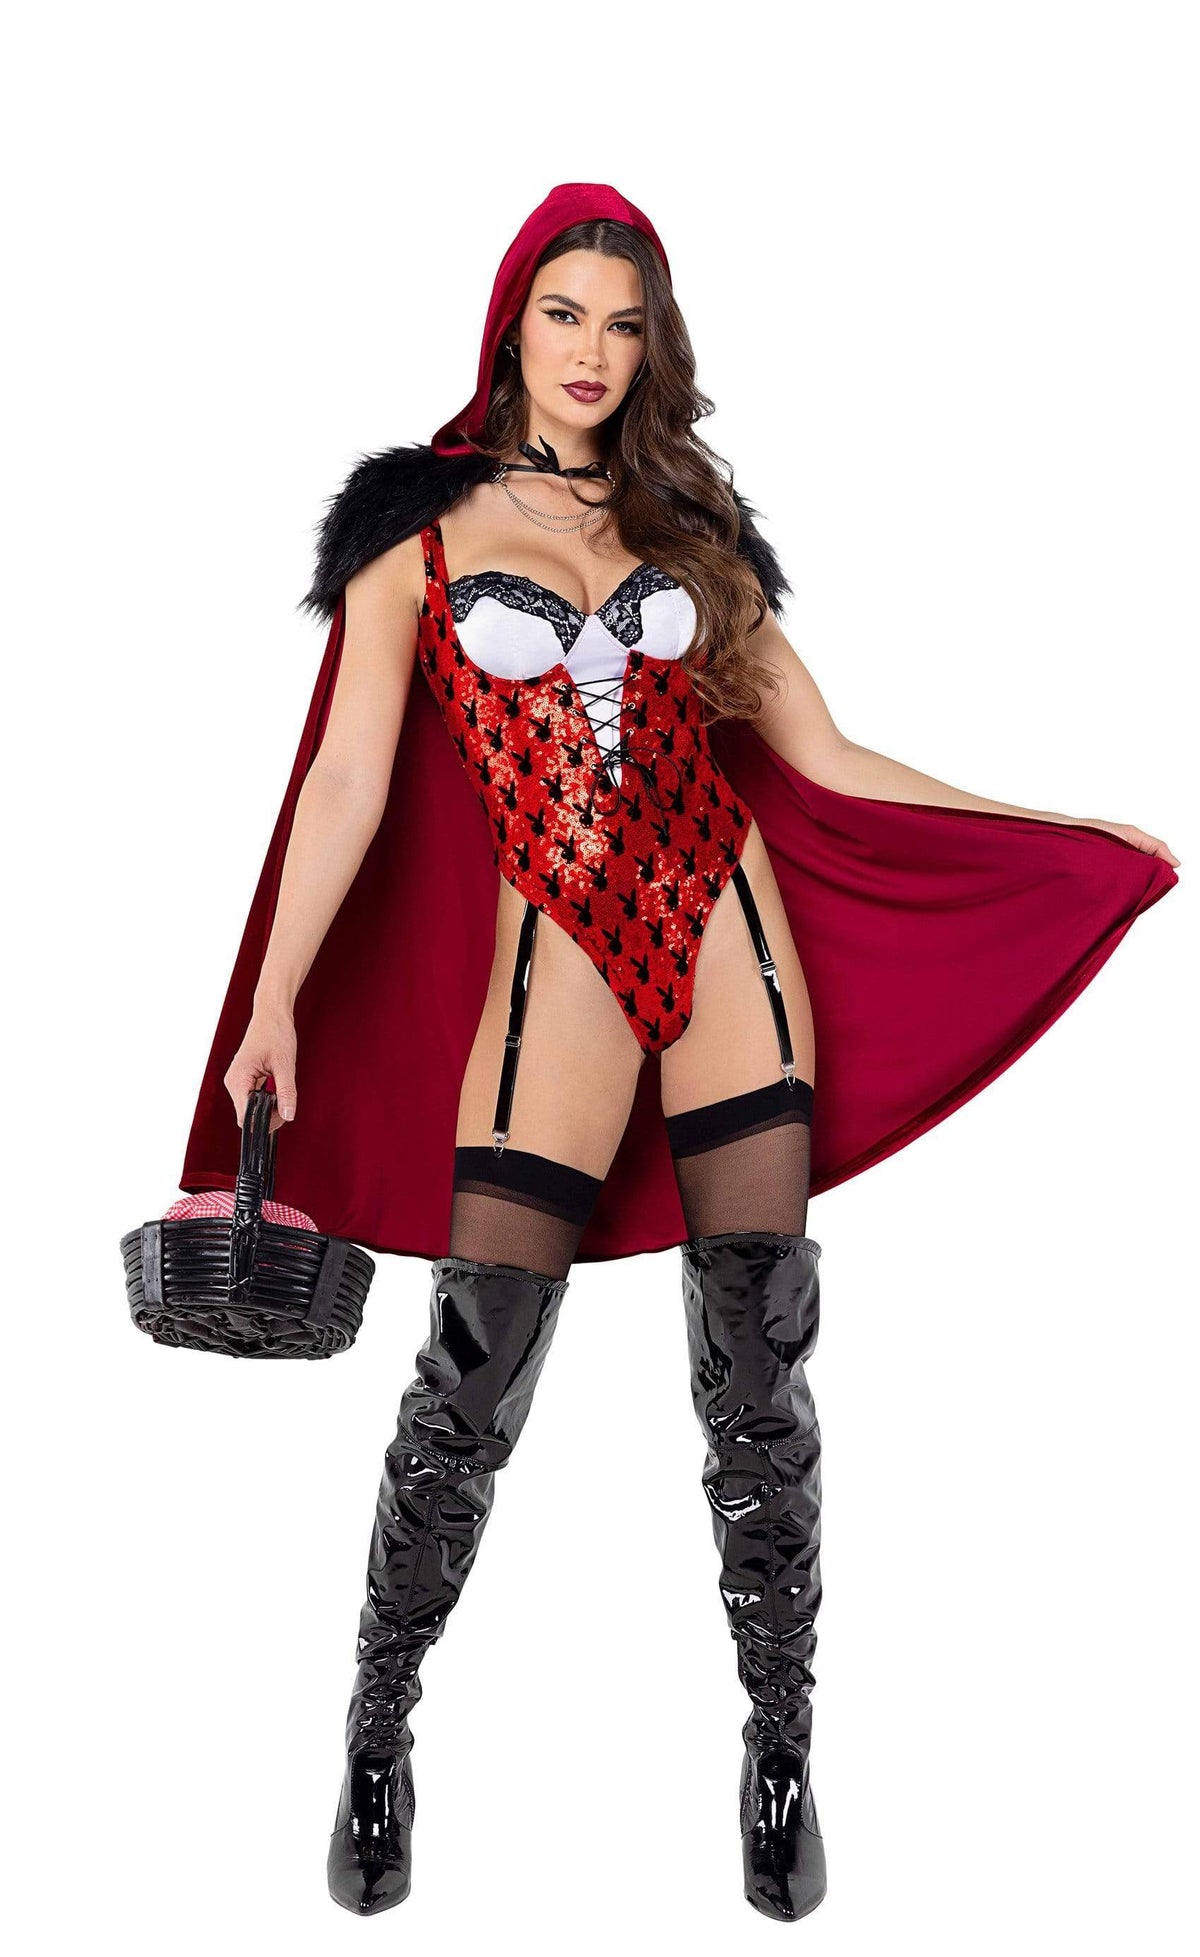 Roma Costume Small / Black/Red PB117 - 2pc Playboy Enchanted Forest PB117-Blk/Red-S